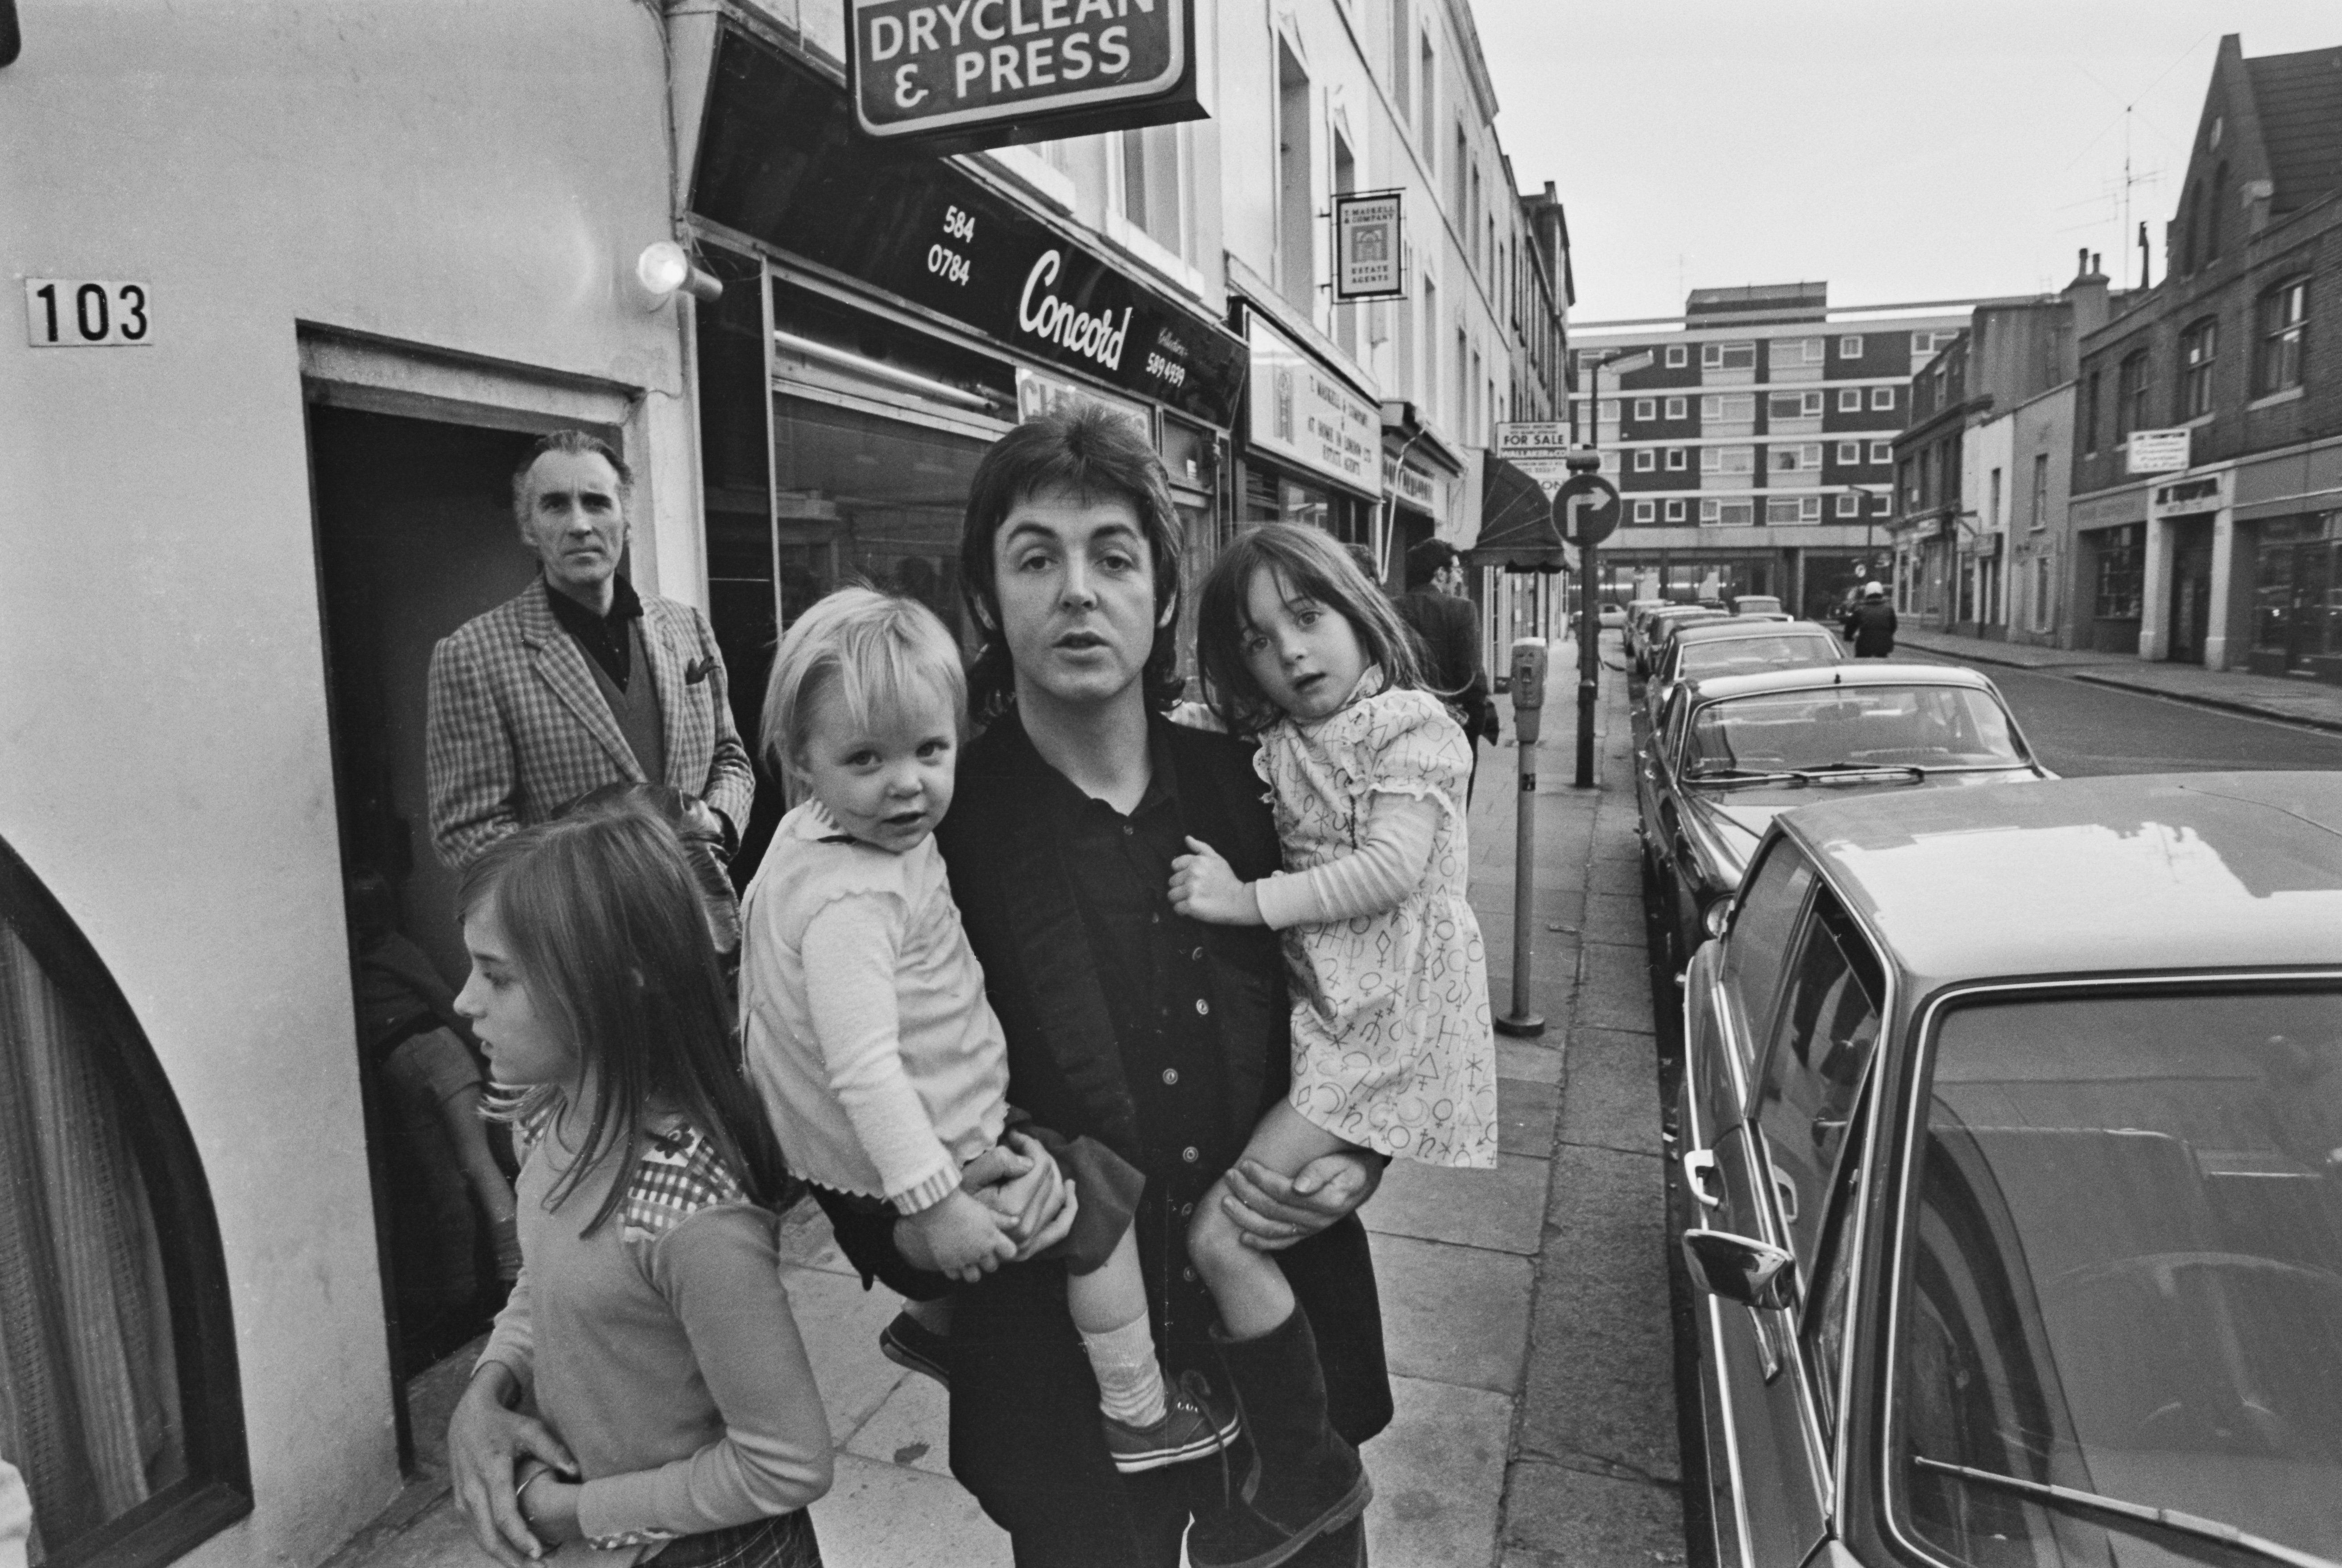 British musician Paul McCartney with his daughters at San Martino in Knightsbridge, London, UK, 28th October 1973. | Source: Getty Images